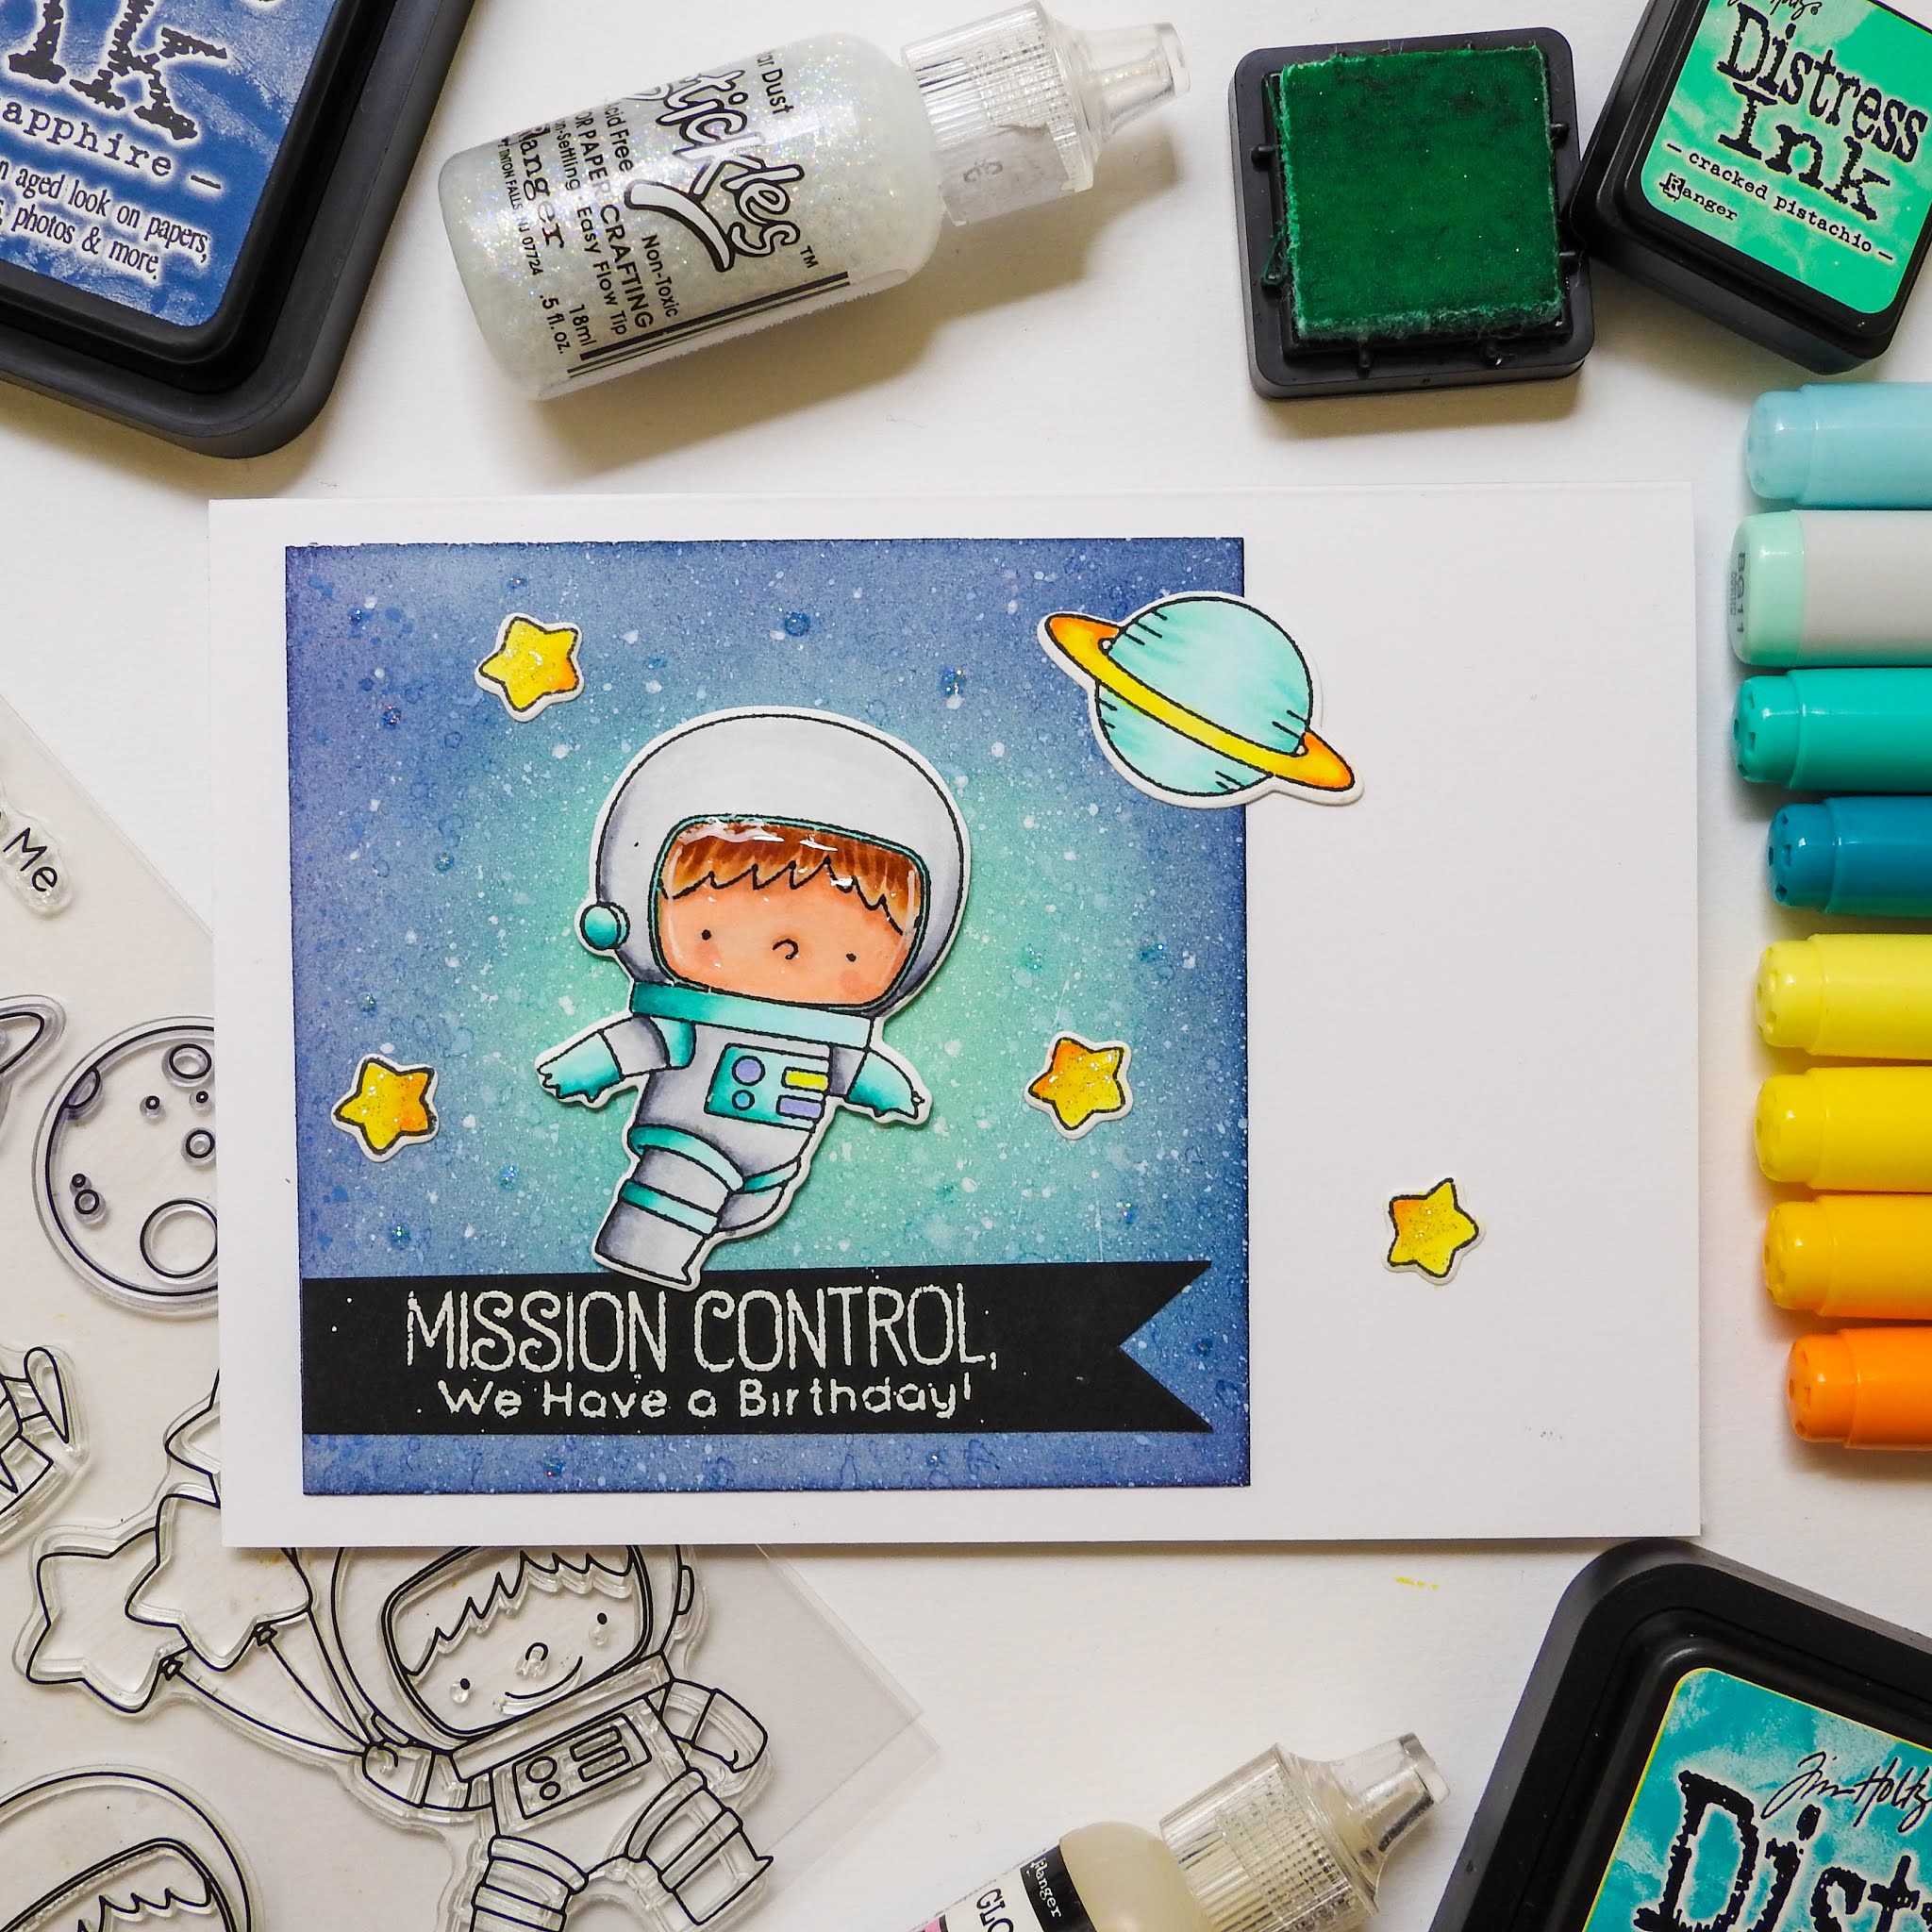 Nina's crafty place: Mission control